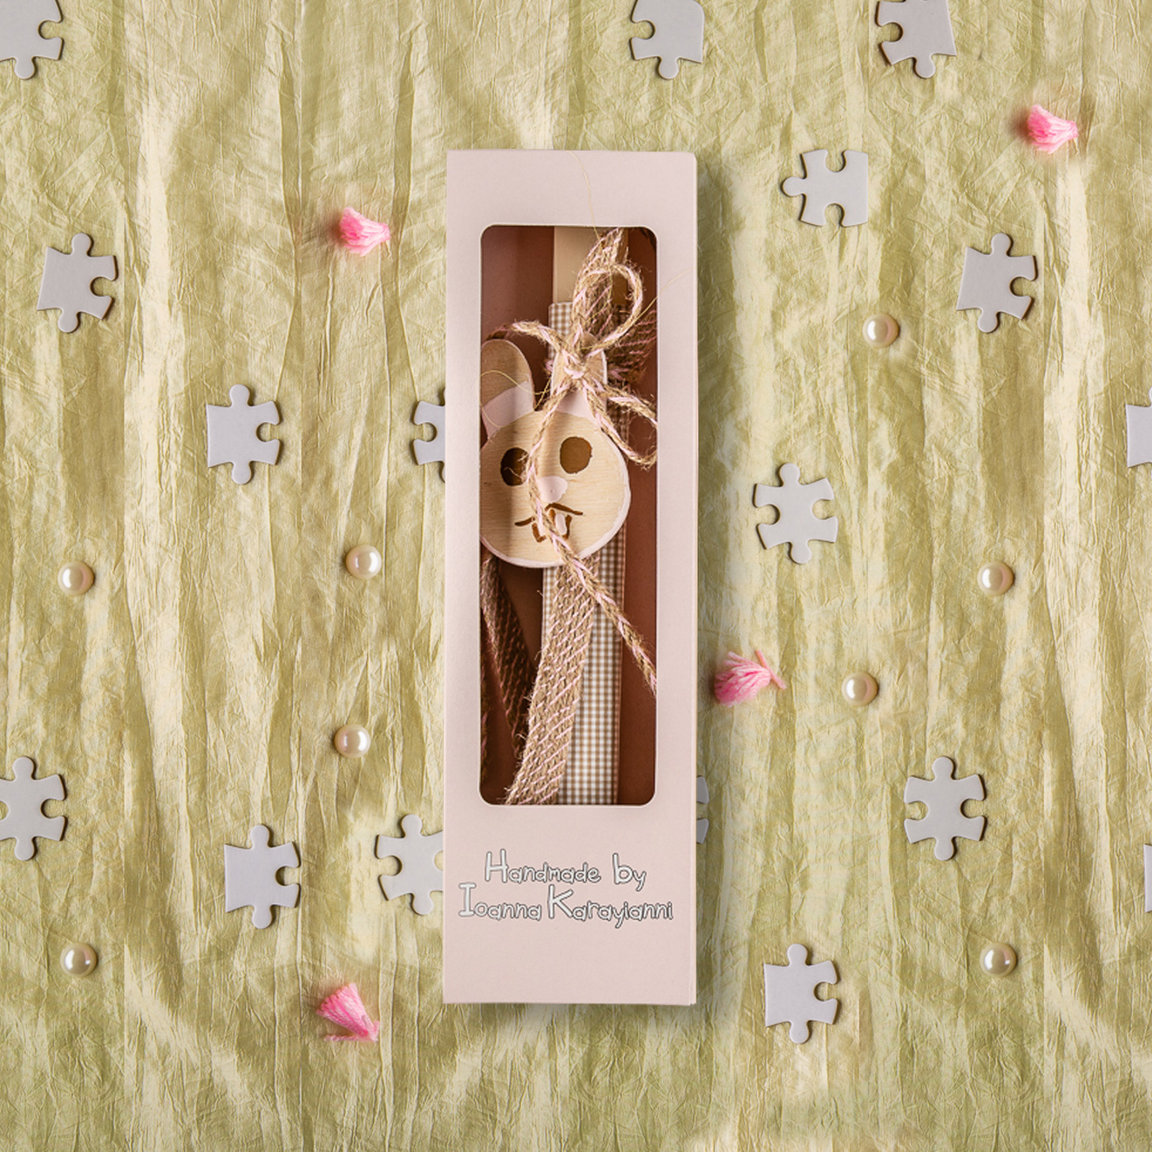 Handmade Easter candle with wooden bunny